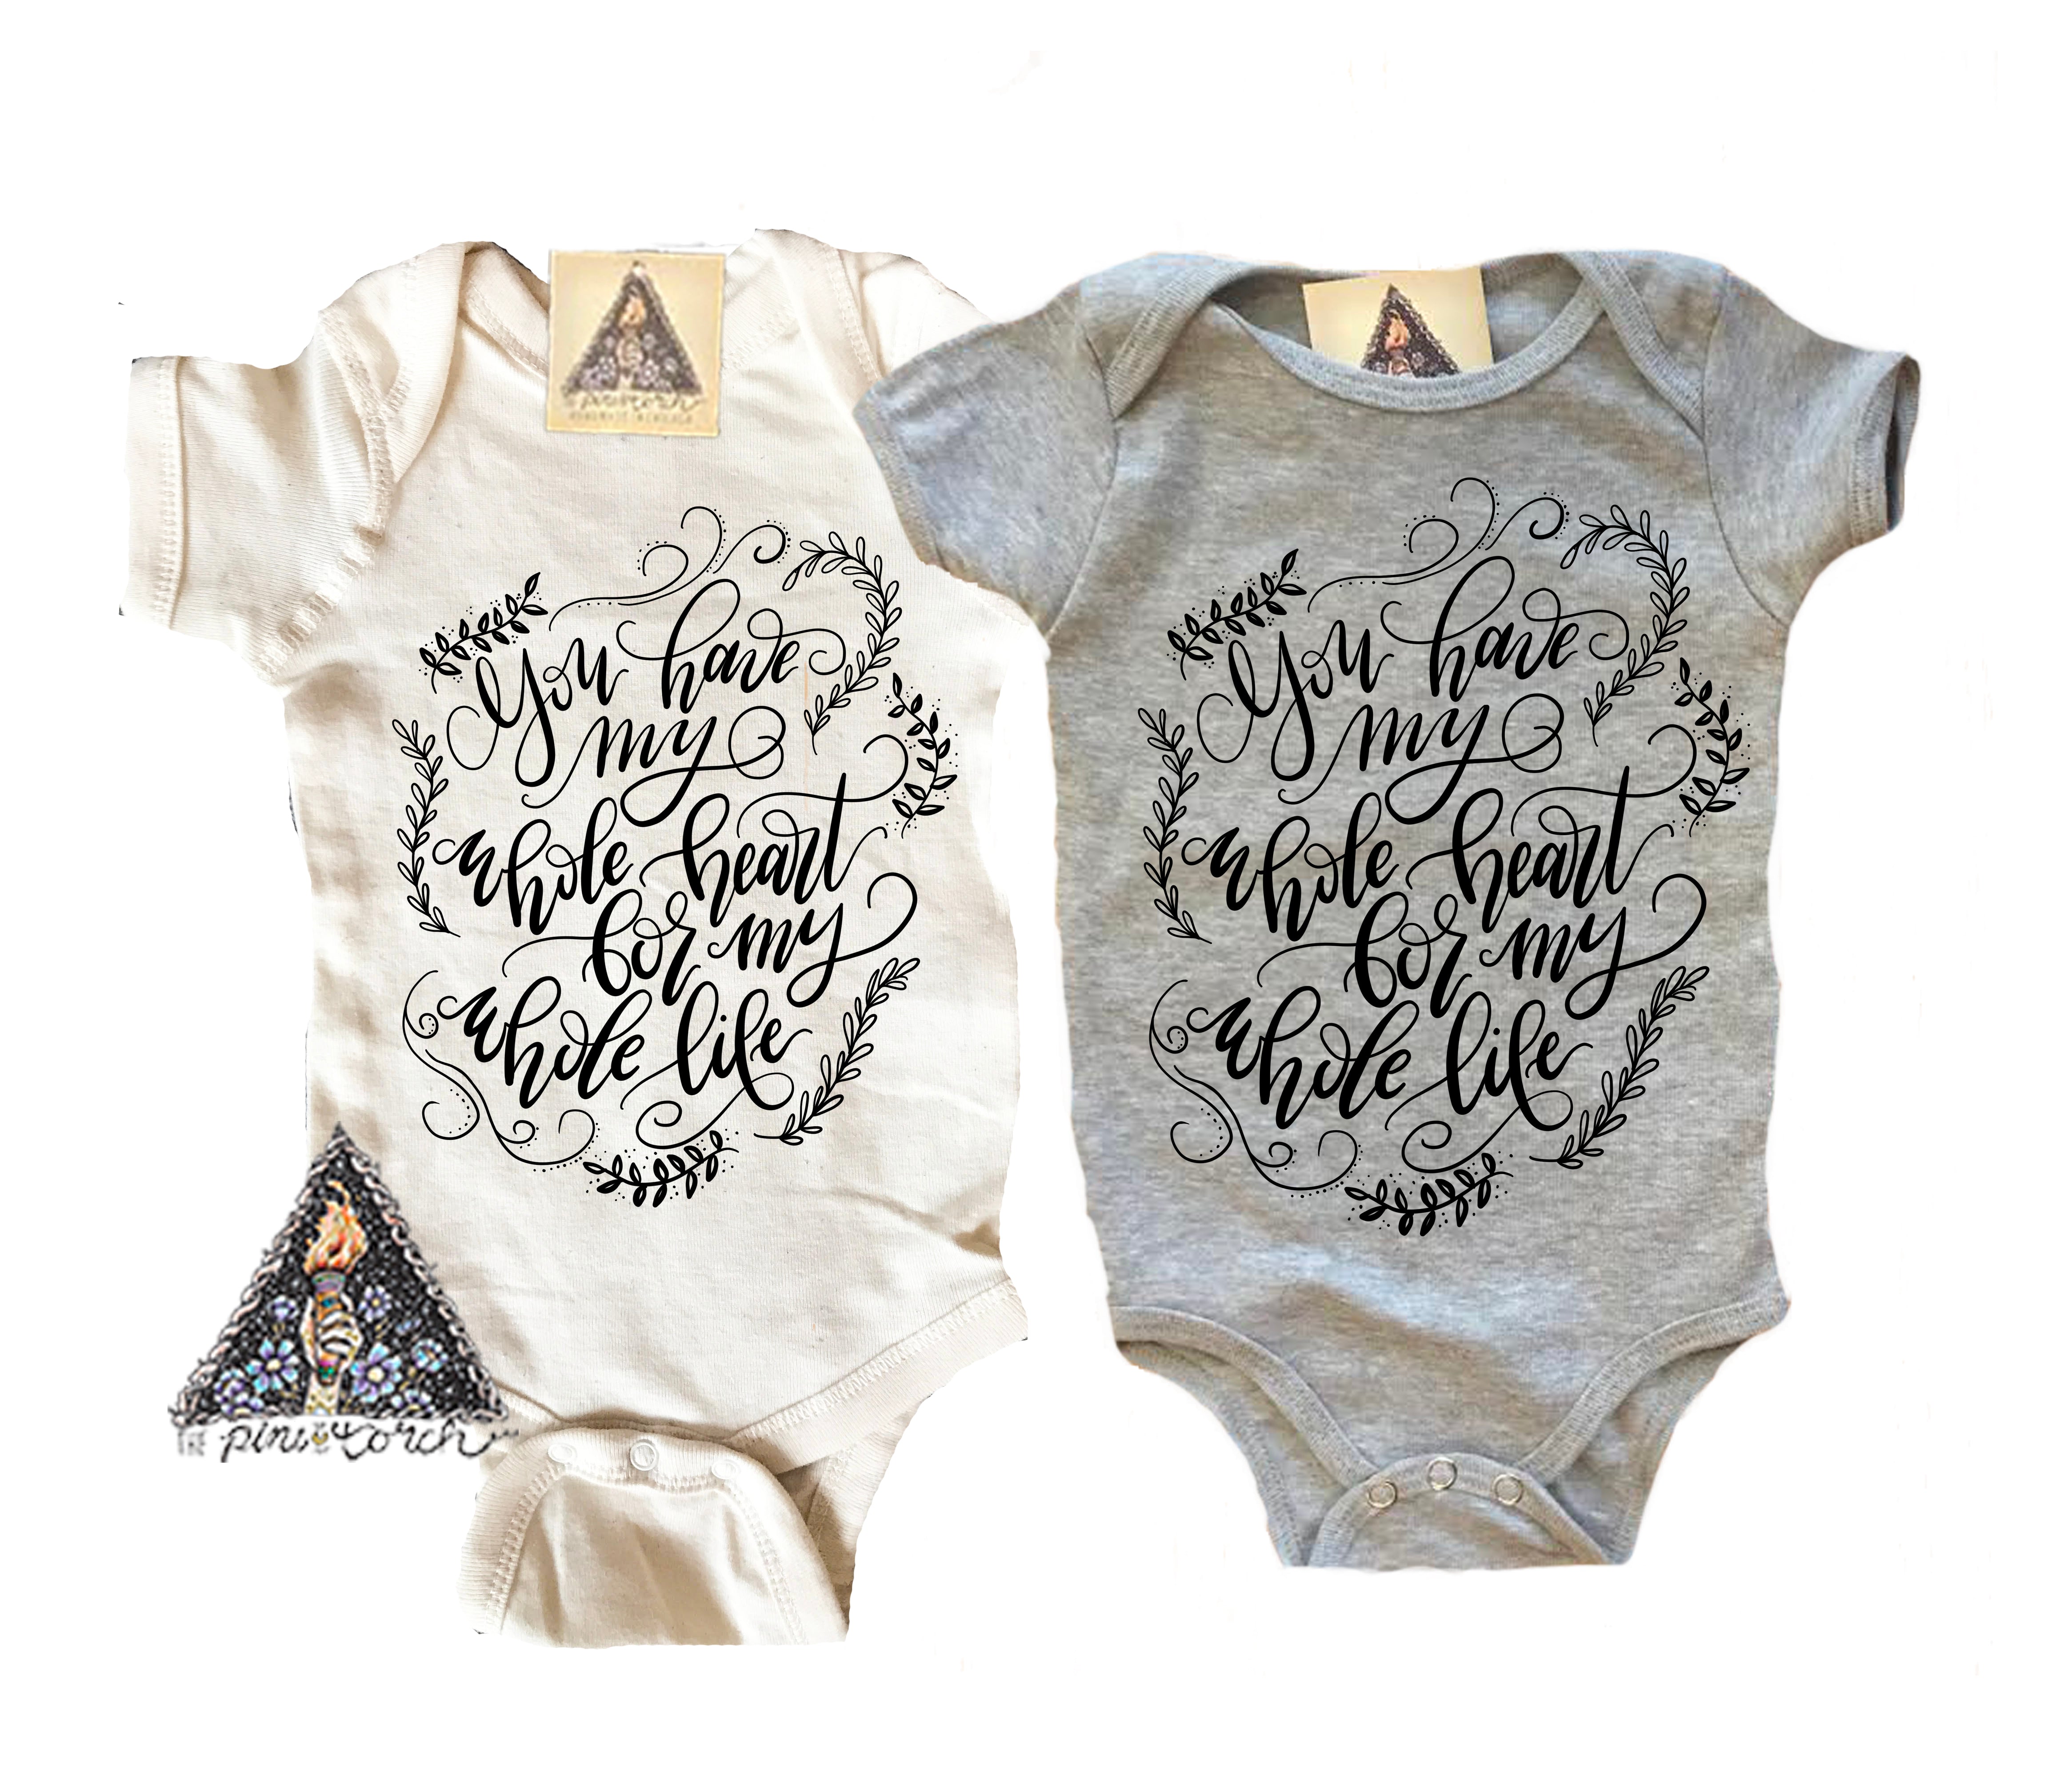 « YOU HAVE MY WHOLE HEART FOR MY WHOLE LIFE » CREAM BODYSUIT